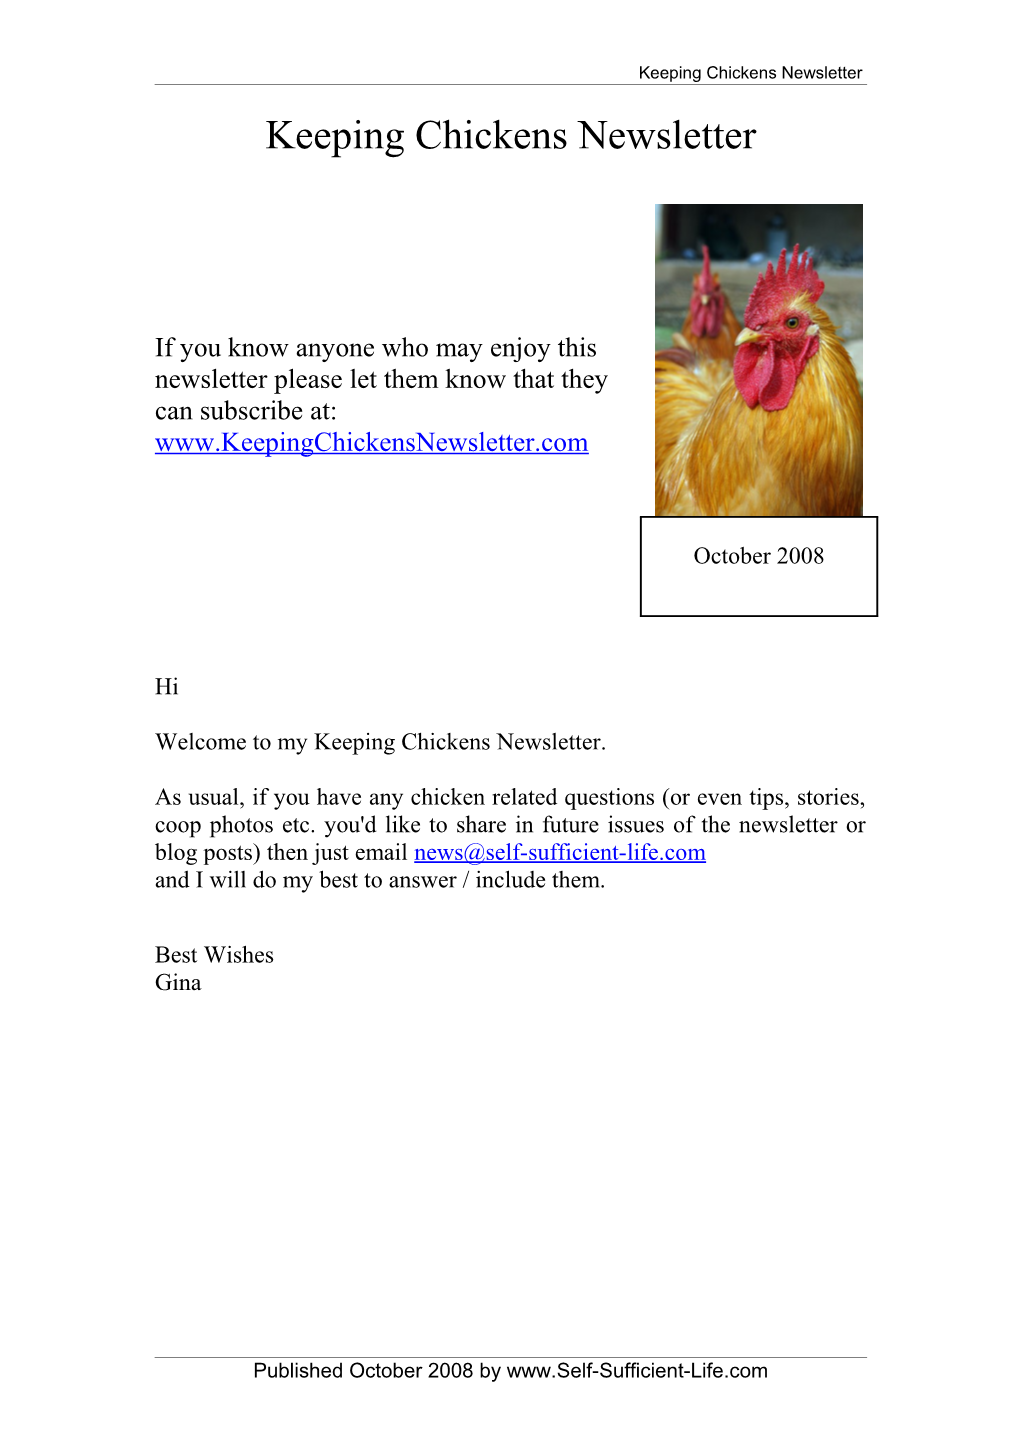 Welcome to My Keeping Chickens Newsletter